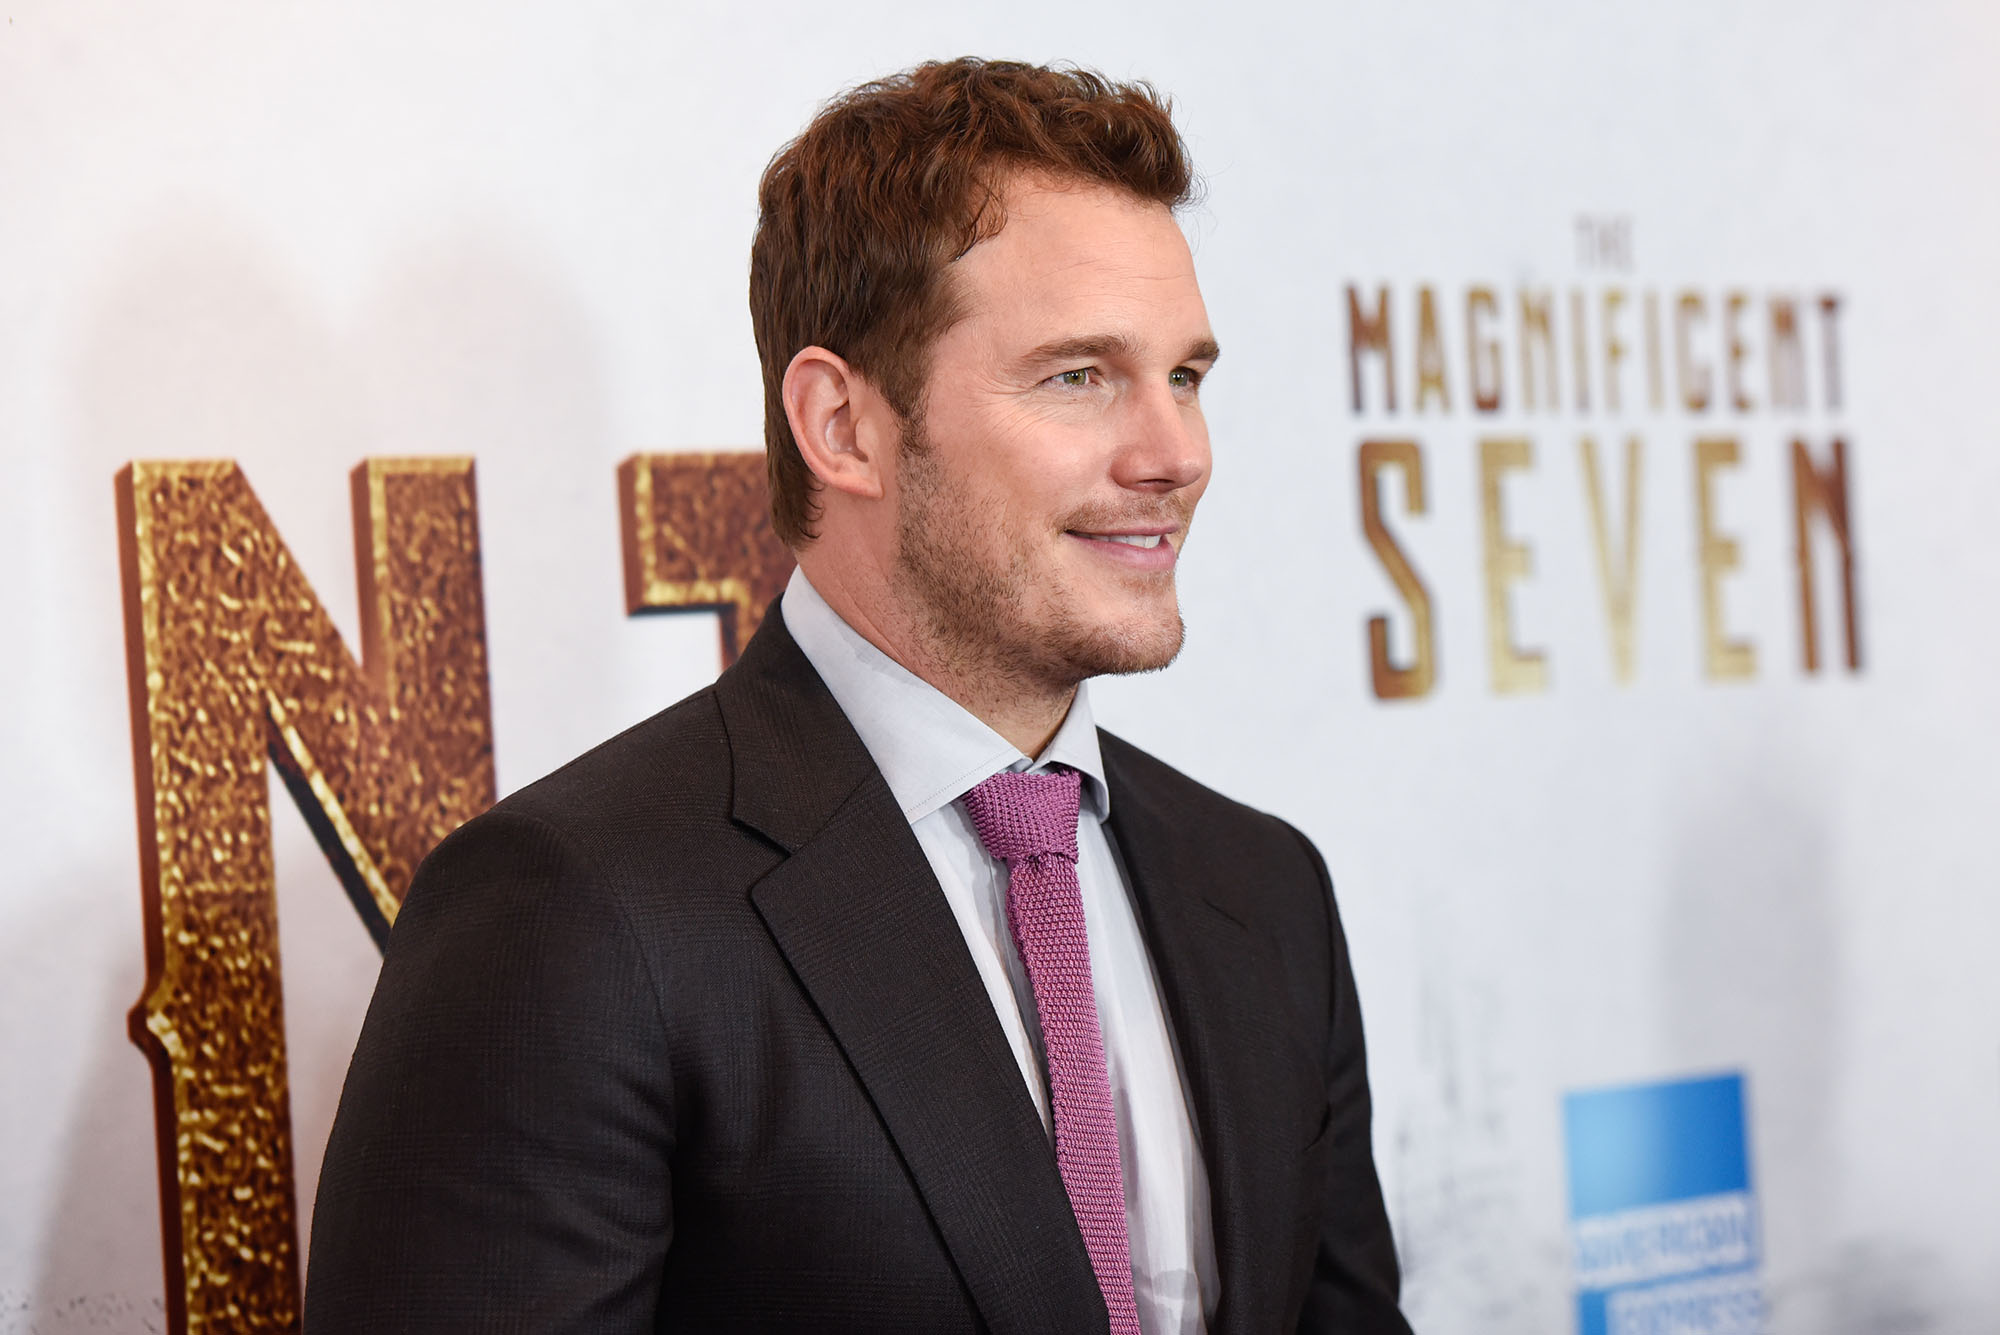 Chris Pratt attends "The Magnificent Seven" New York Premiere at the Museum of Modern Art on September 19, 2016 in New York City.  (Photo by Matthew Eisman/FilmMagic) (Matthew Eisman&mdash;FilmMagic)